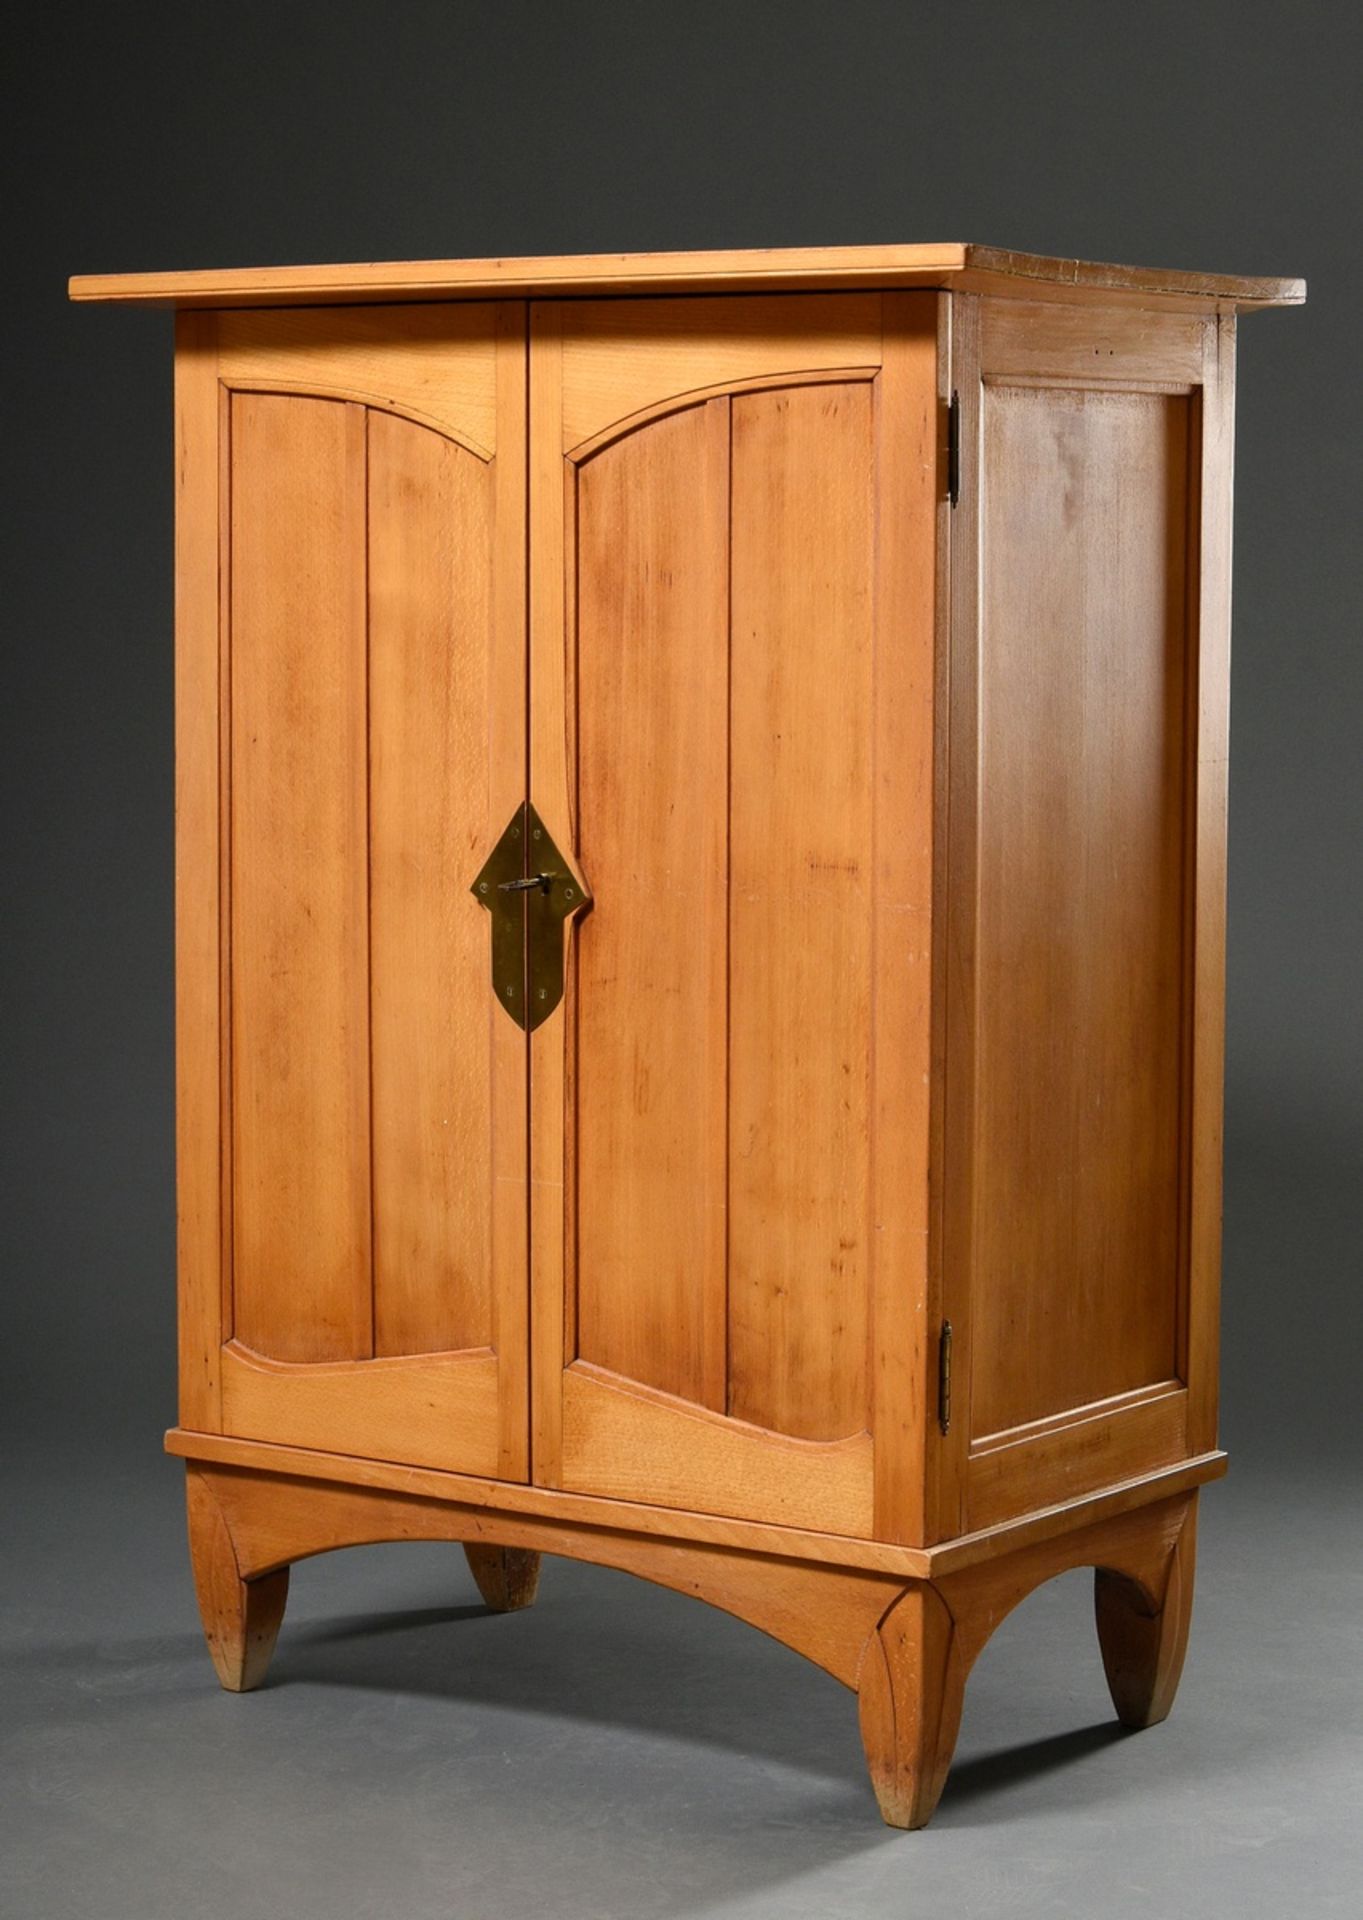 Van de Velde, Henry (1863-1957) Small cabinet on short feet and arched frame, two-door front with p